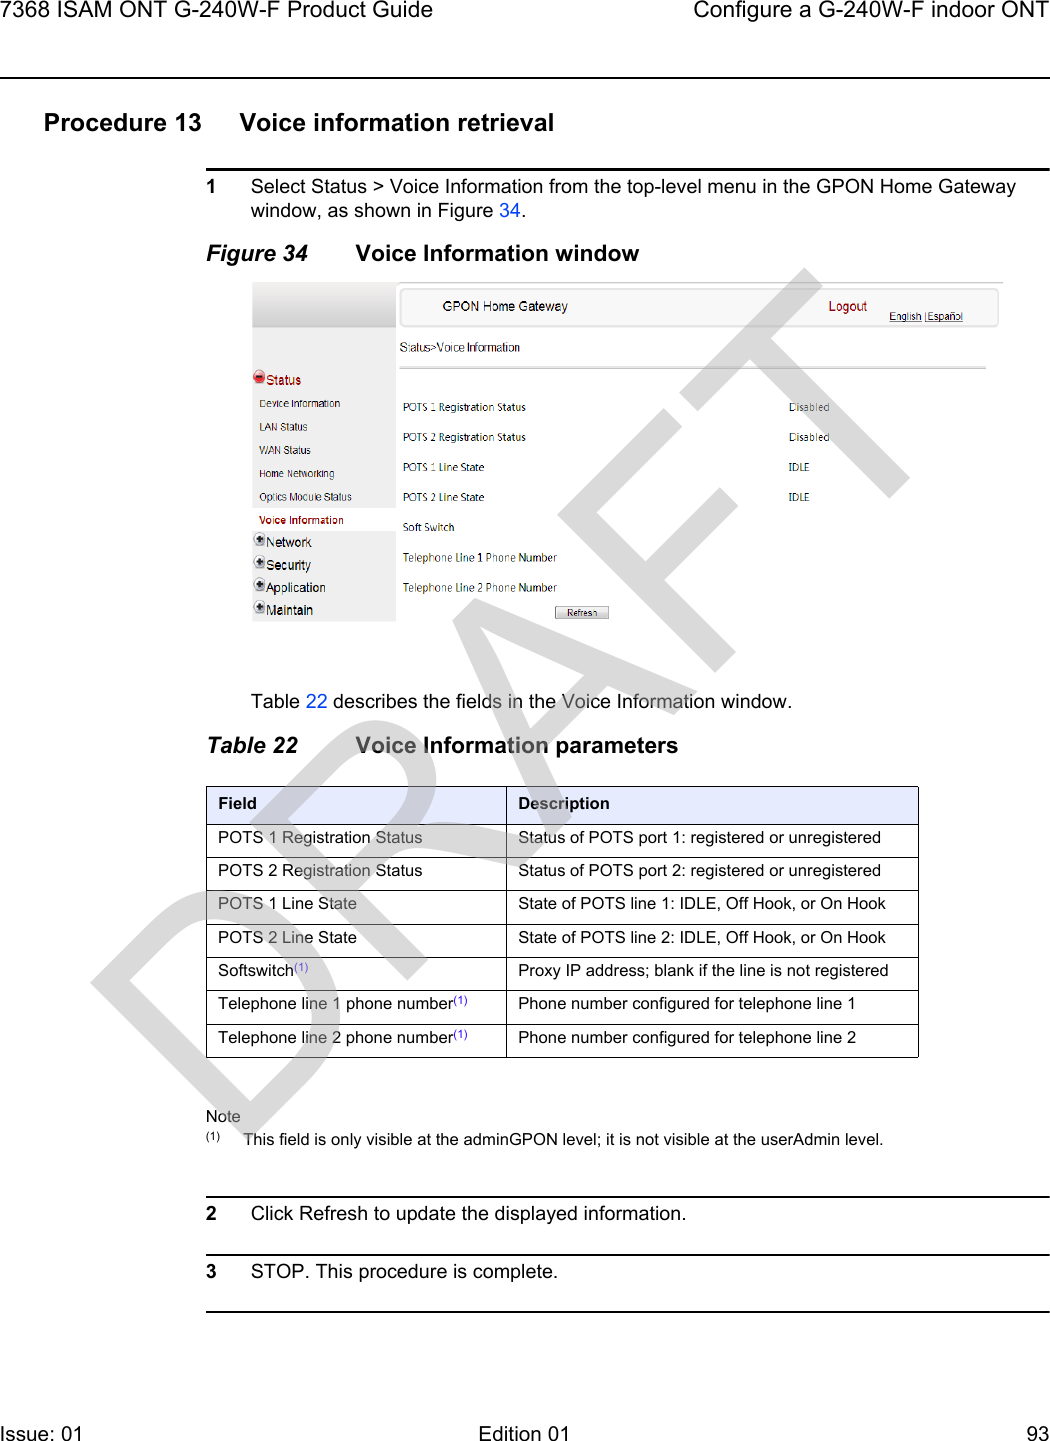 7368 ISAM ONT G-240W-F Product Guide Configure a G-240W-F indoor ONTIssue: 01 Edition 01 93 Procedure 13 Voice information retrieval1Select Status &gt; Voice Information from the top-level menu in the GPON Home Gateway window, as shown in Figure 34.Figure 34 Voice Information windowTable 22 describes the fields in the Voice Information window.Table 22 Voice Information parametersNote(1) This field is only visible at the adminGPON level; it is not visible at the userAdmin level.2Click Refresh to update the displayed information. 3STOP. This procedure is complete.Field DescriptionPOTS 1 Registration Status Status of POTS port 1: registered or unregisteredPOTS 2 Registration Status Status of POTS port 2: registered or unregisteredPOTS 1 Line State State of POTS line 1: IDLE, Off Hook, or On HookPOTS 2 Line State State of POTS line 2: IDLE, Off Hook, or On HookSoftswitch(1) Proxy IP address; blank if the line is not registeredTelephone line 1 phone number(1) Phone number configured for telephone line 1Telephone line 2 phone number(1) Phone number configured for telephone line 2DRAFT